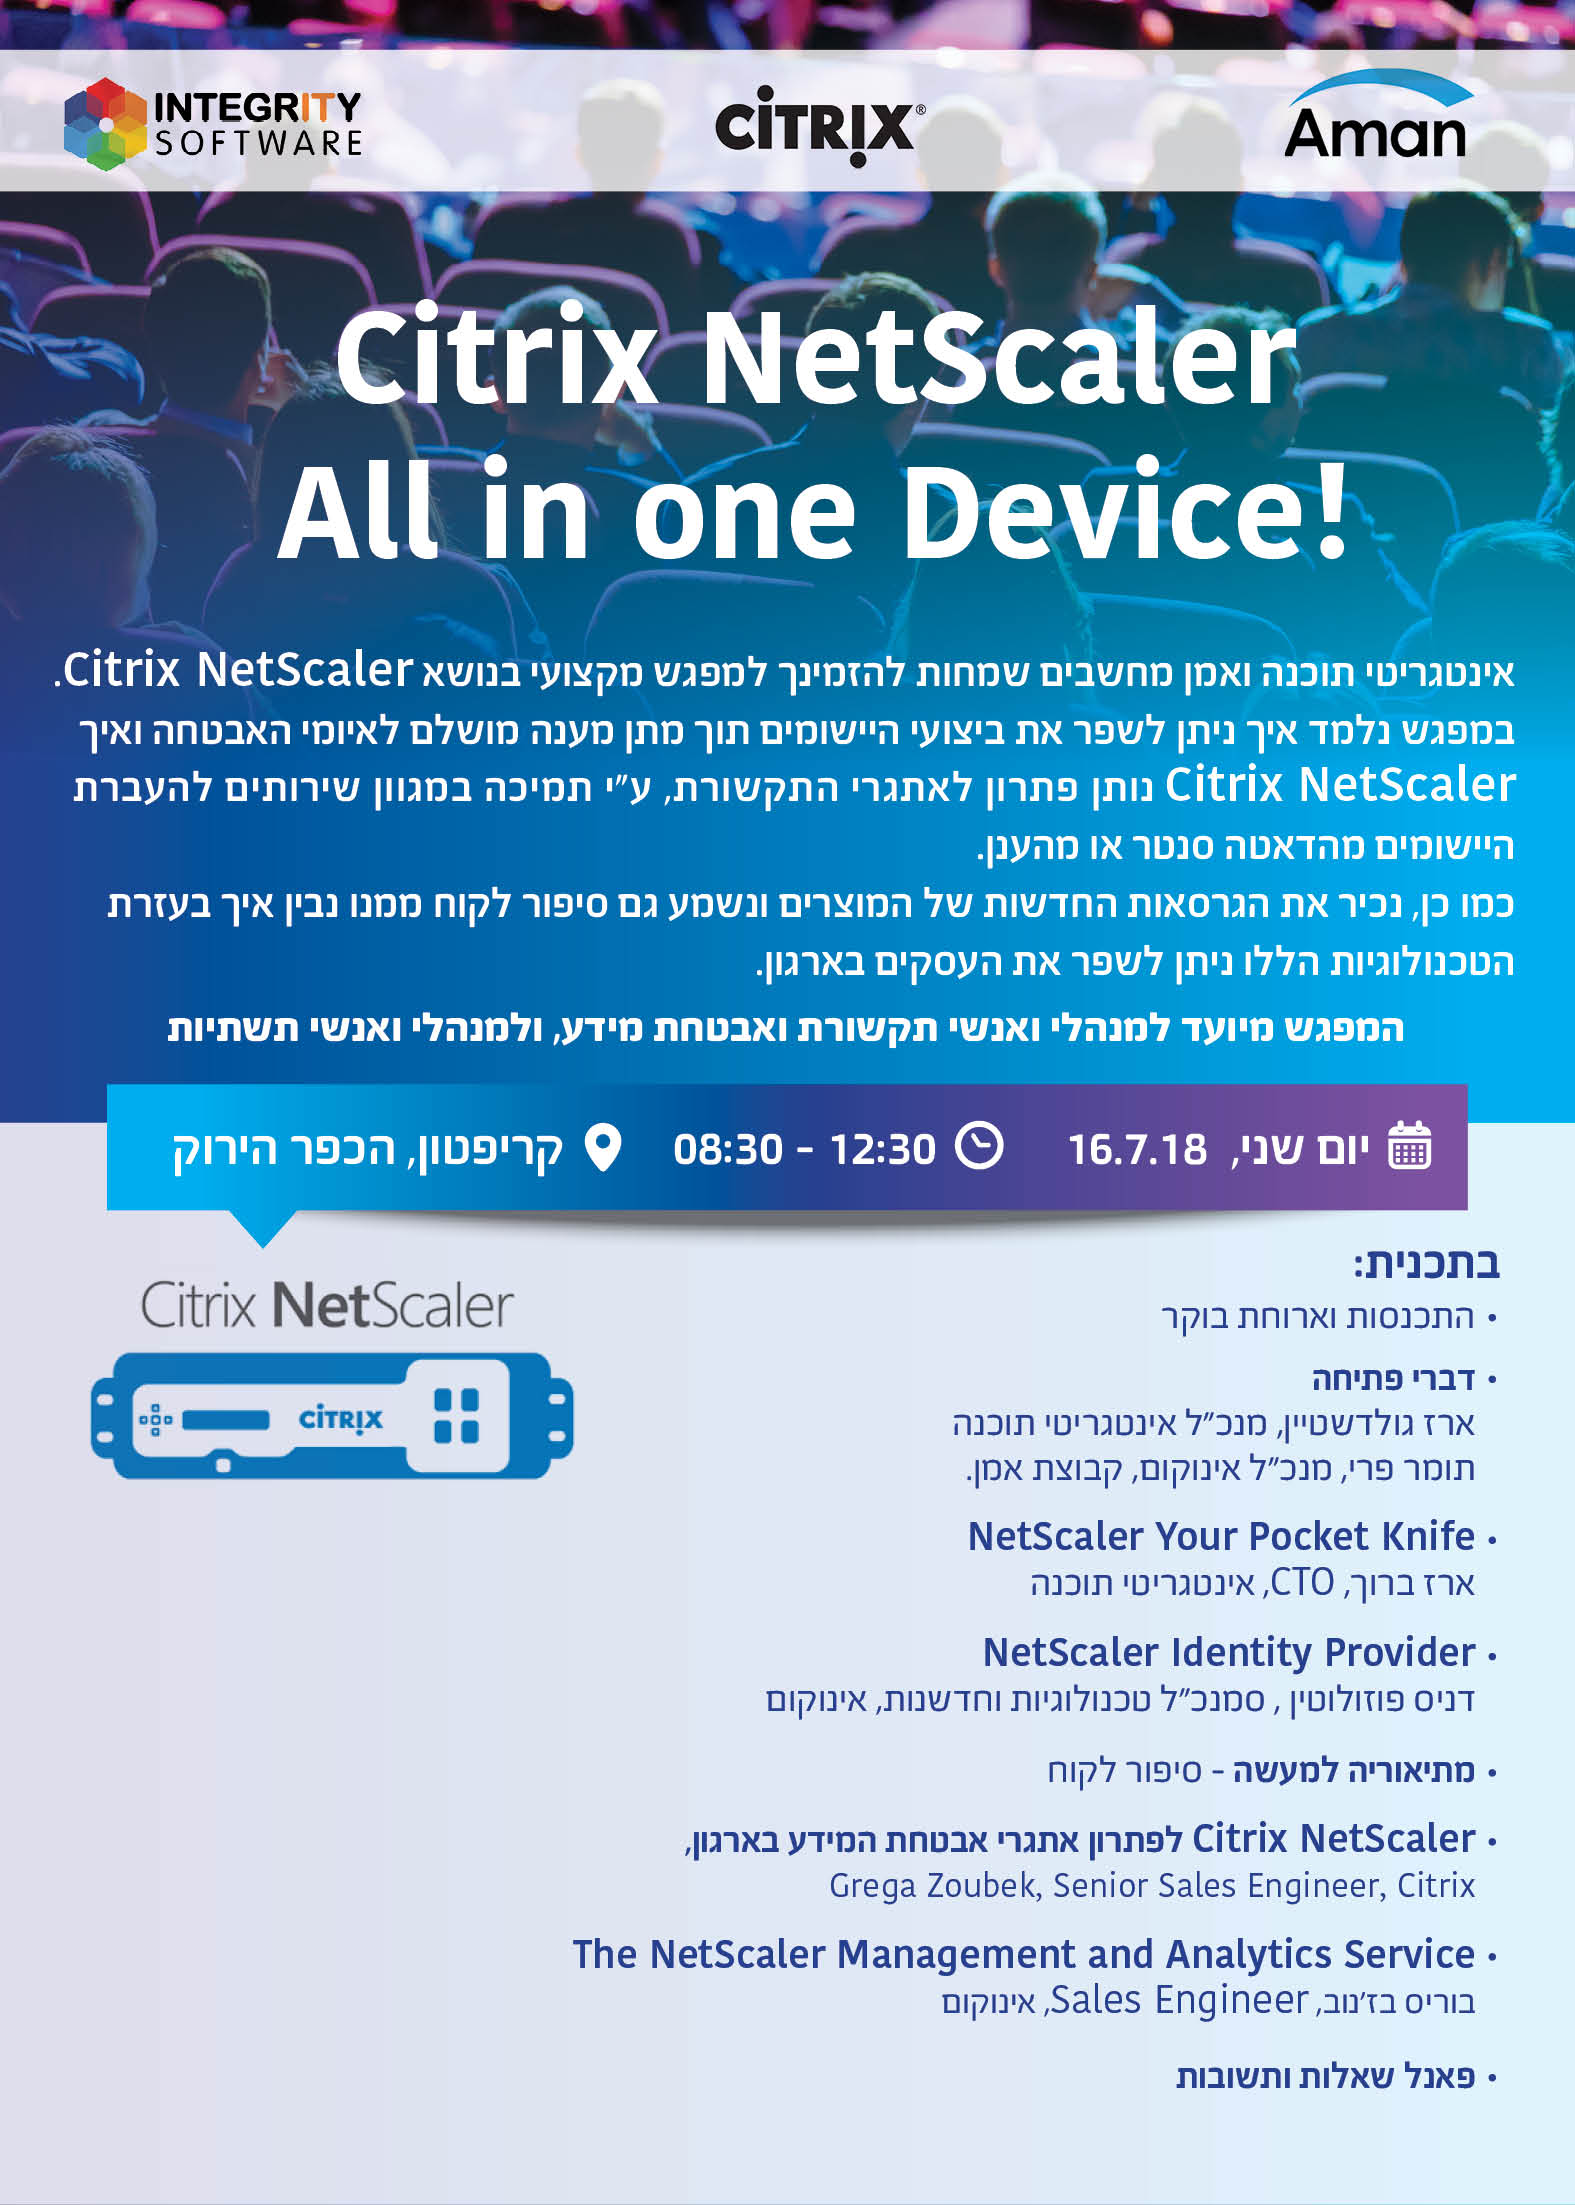 Citrix Netscaler – All in one Device!